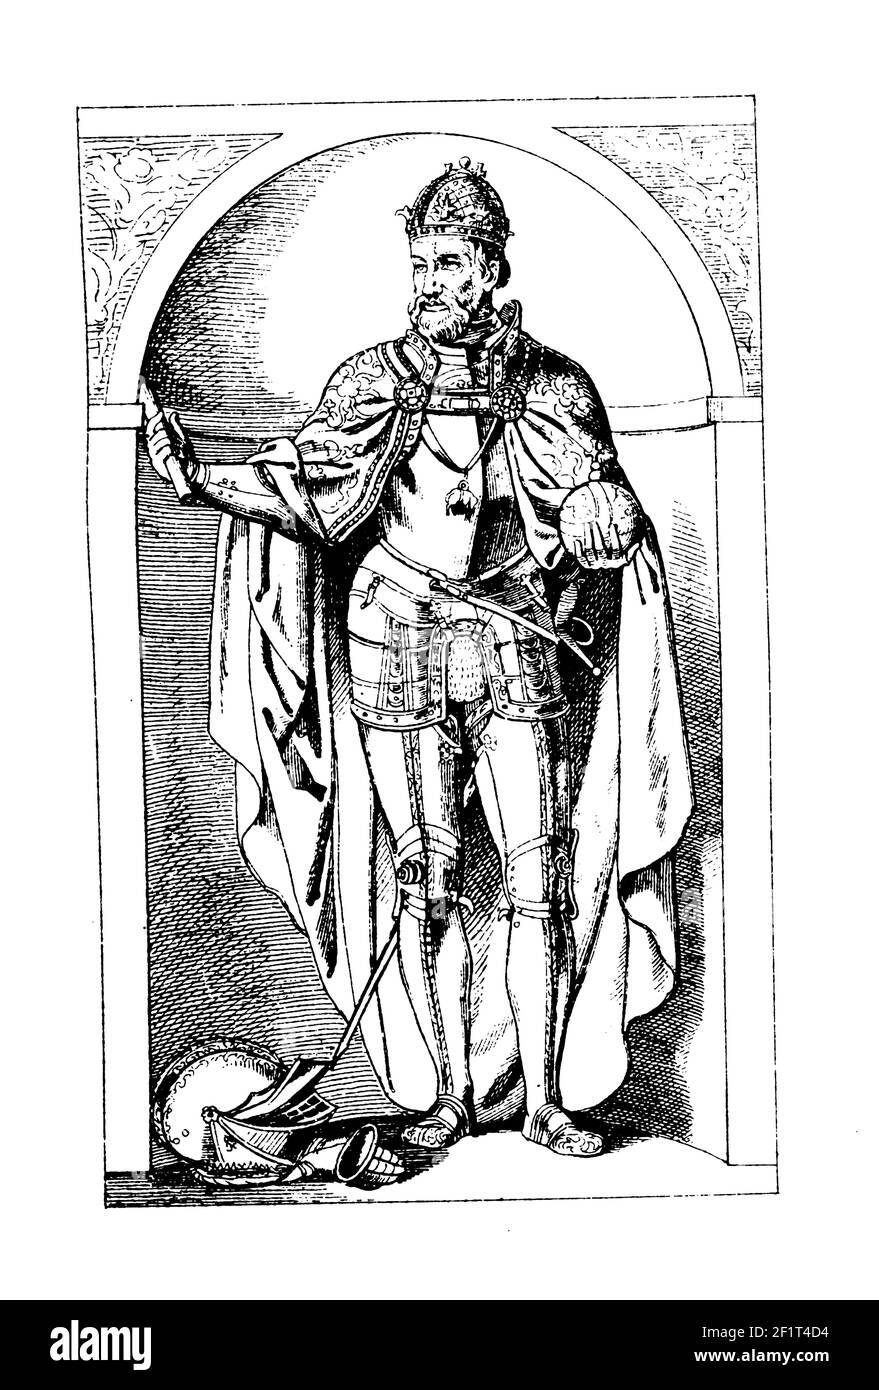 Antique engraving of a portrait of Ferdinand I, Holy Roman Emperor, King of Bohemia and Hungary. He was born on March 10, 1503 in Alcala de Henares, C Stock Photo